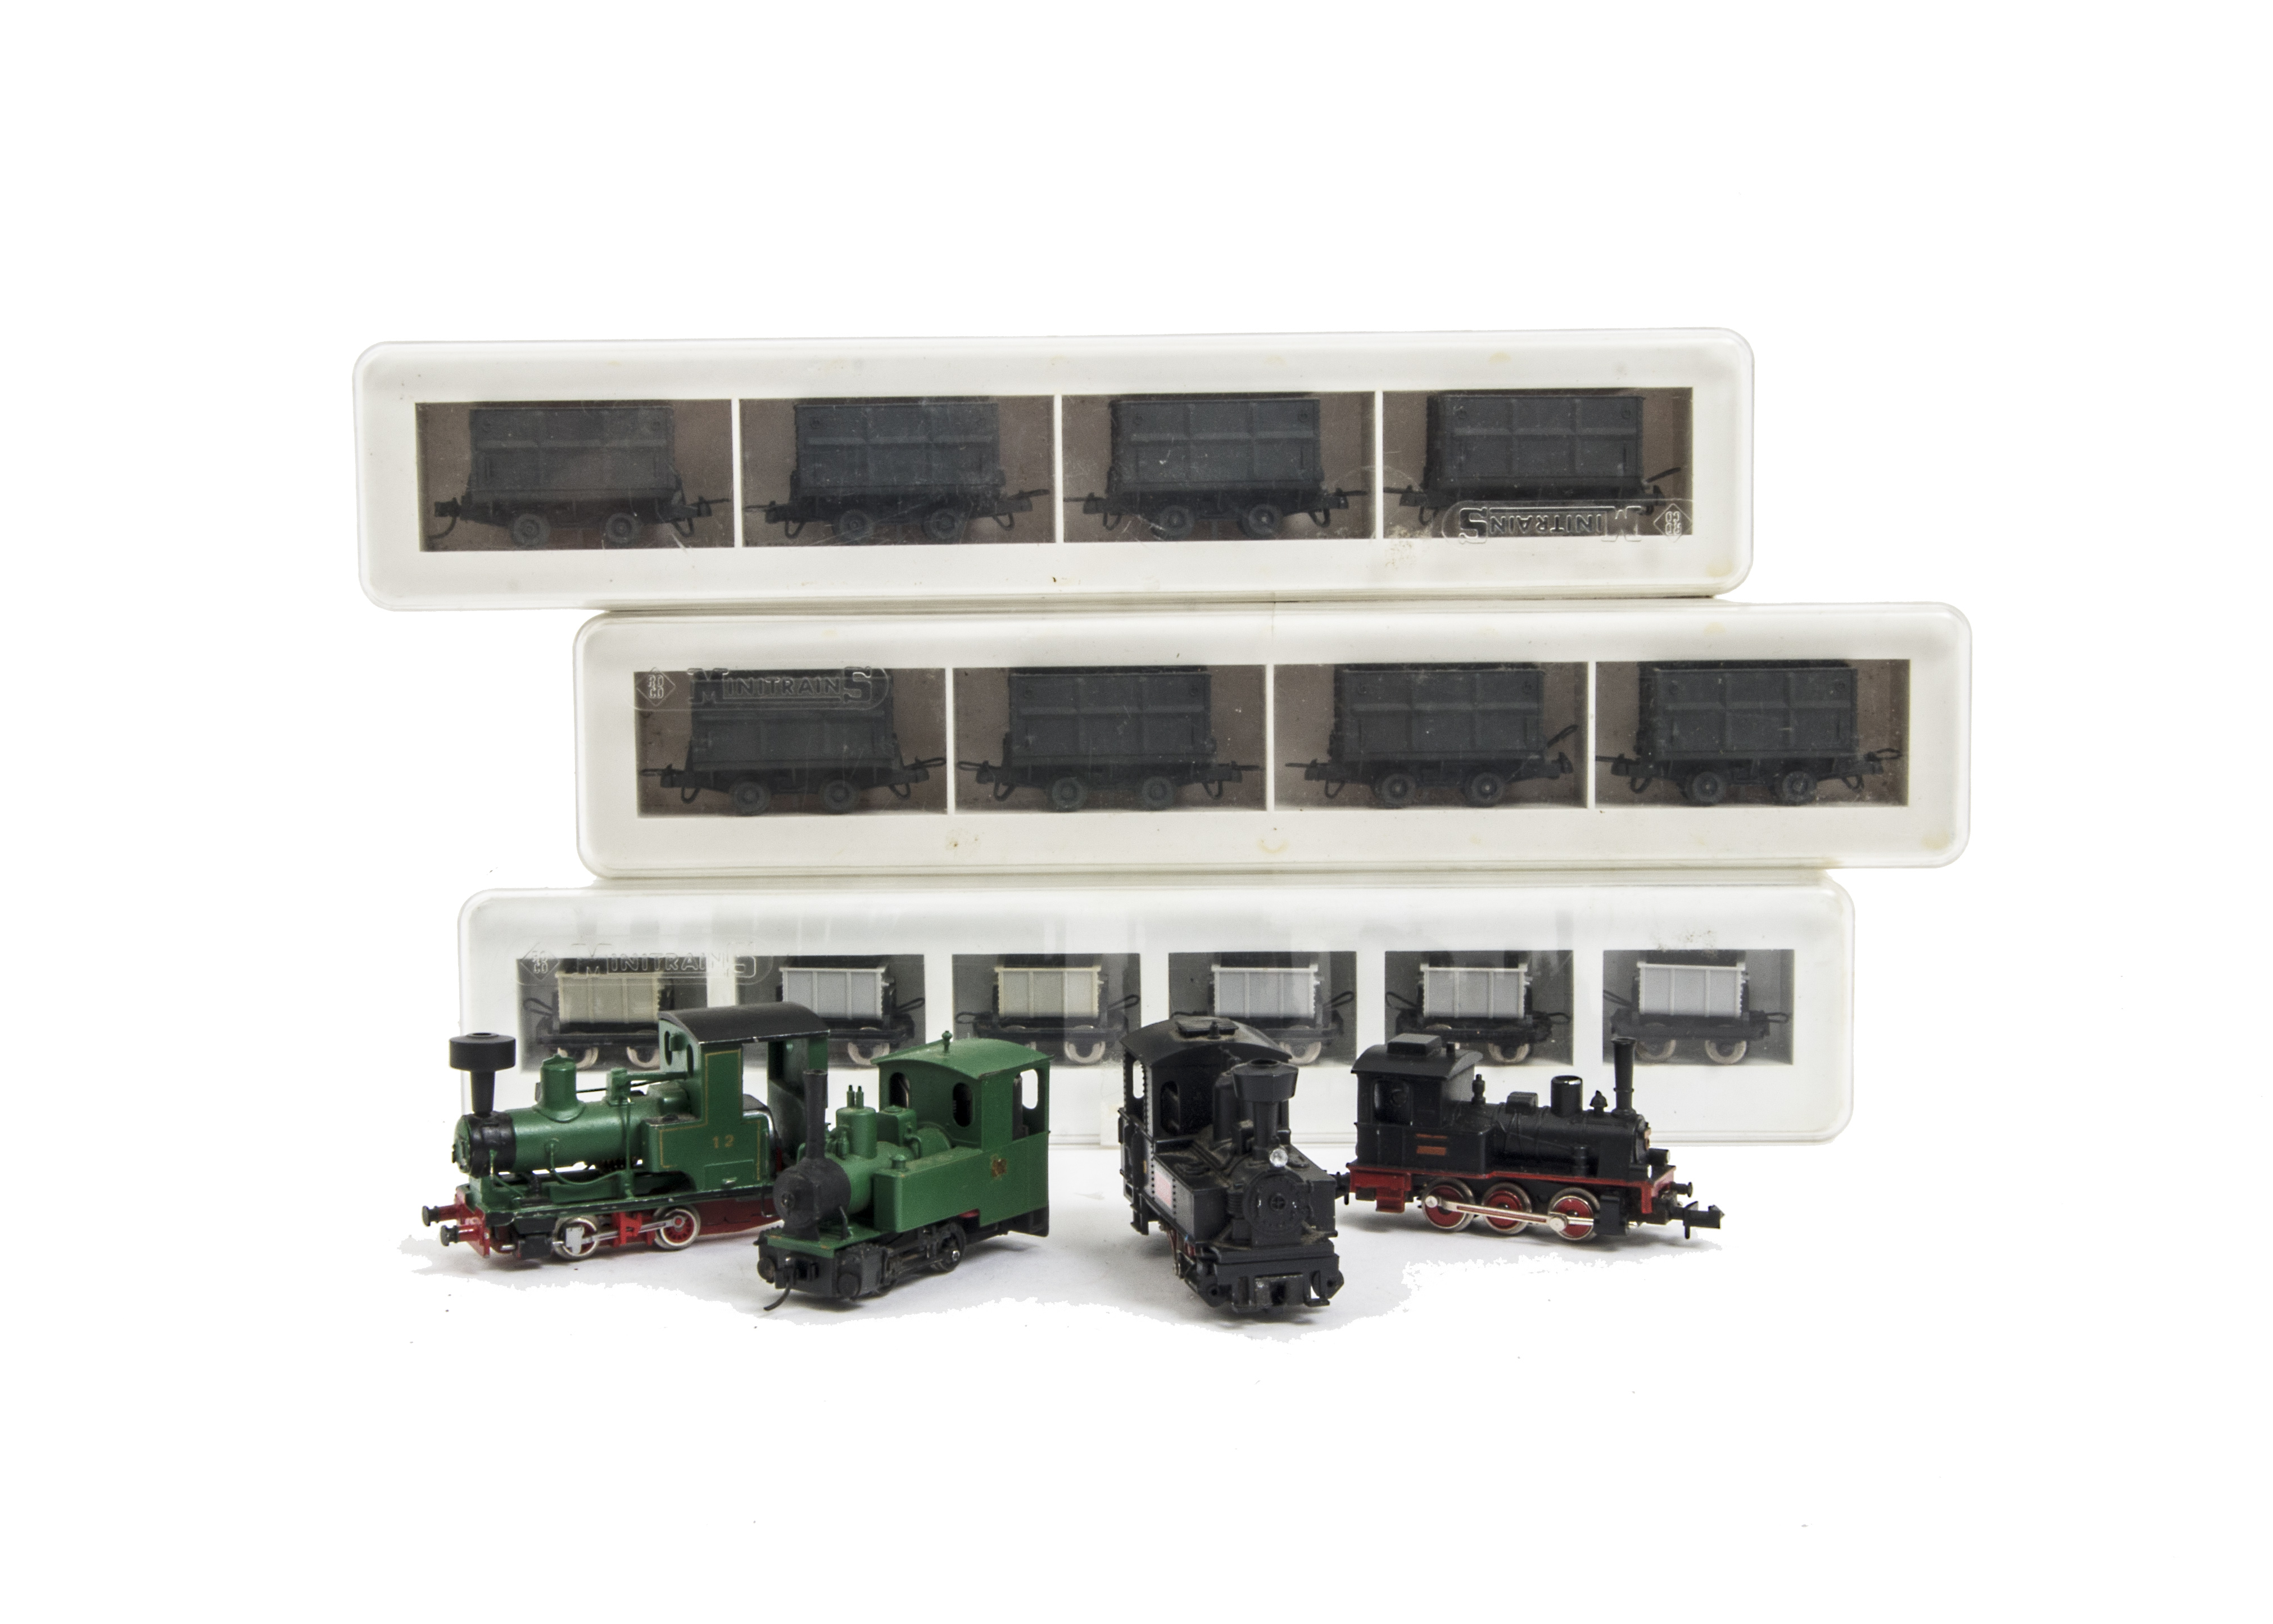 RoCo and other makers 009 Gauge Locomotives and Rolling stock, Roco black 0-6-0 No 9 ‘Eagle’,